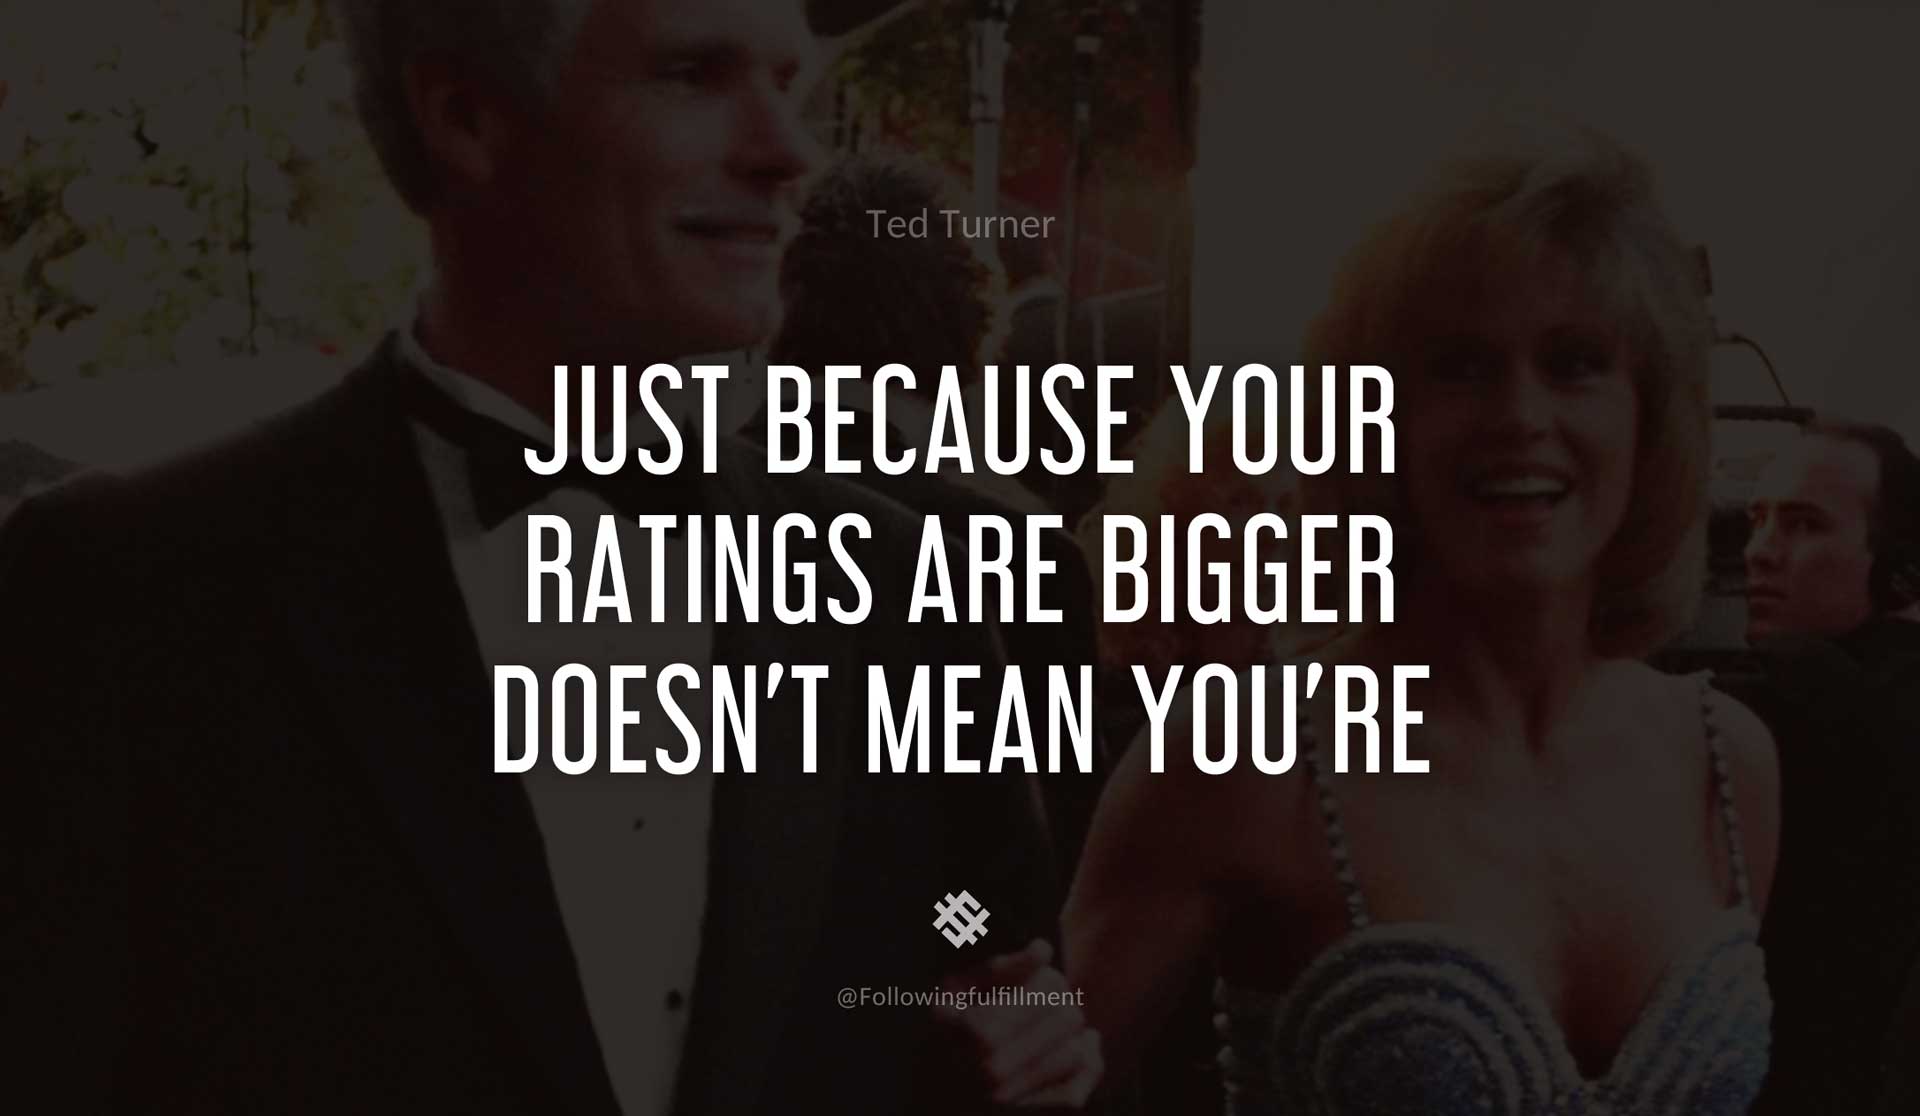 Just-because-your-ratings-are-bigger-doesn't-mean-you're-better.-TED-TURNER-Quote.jpg